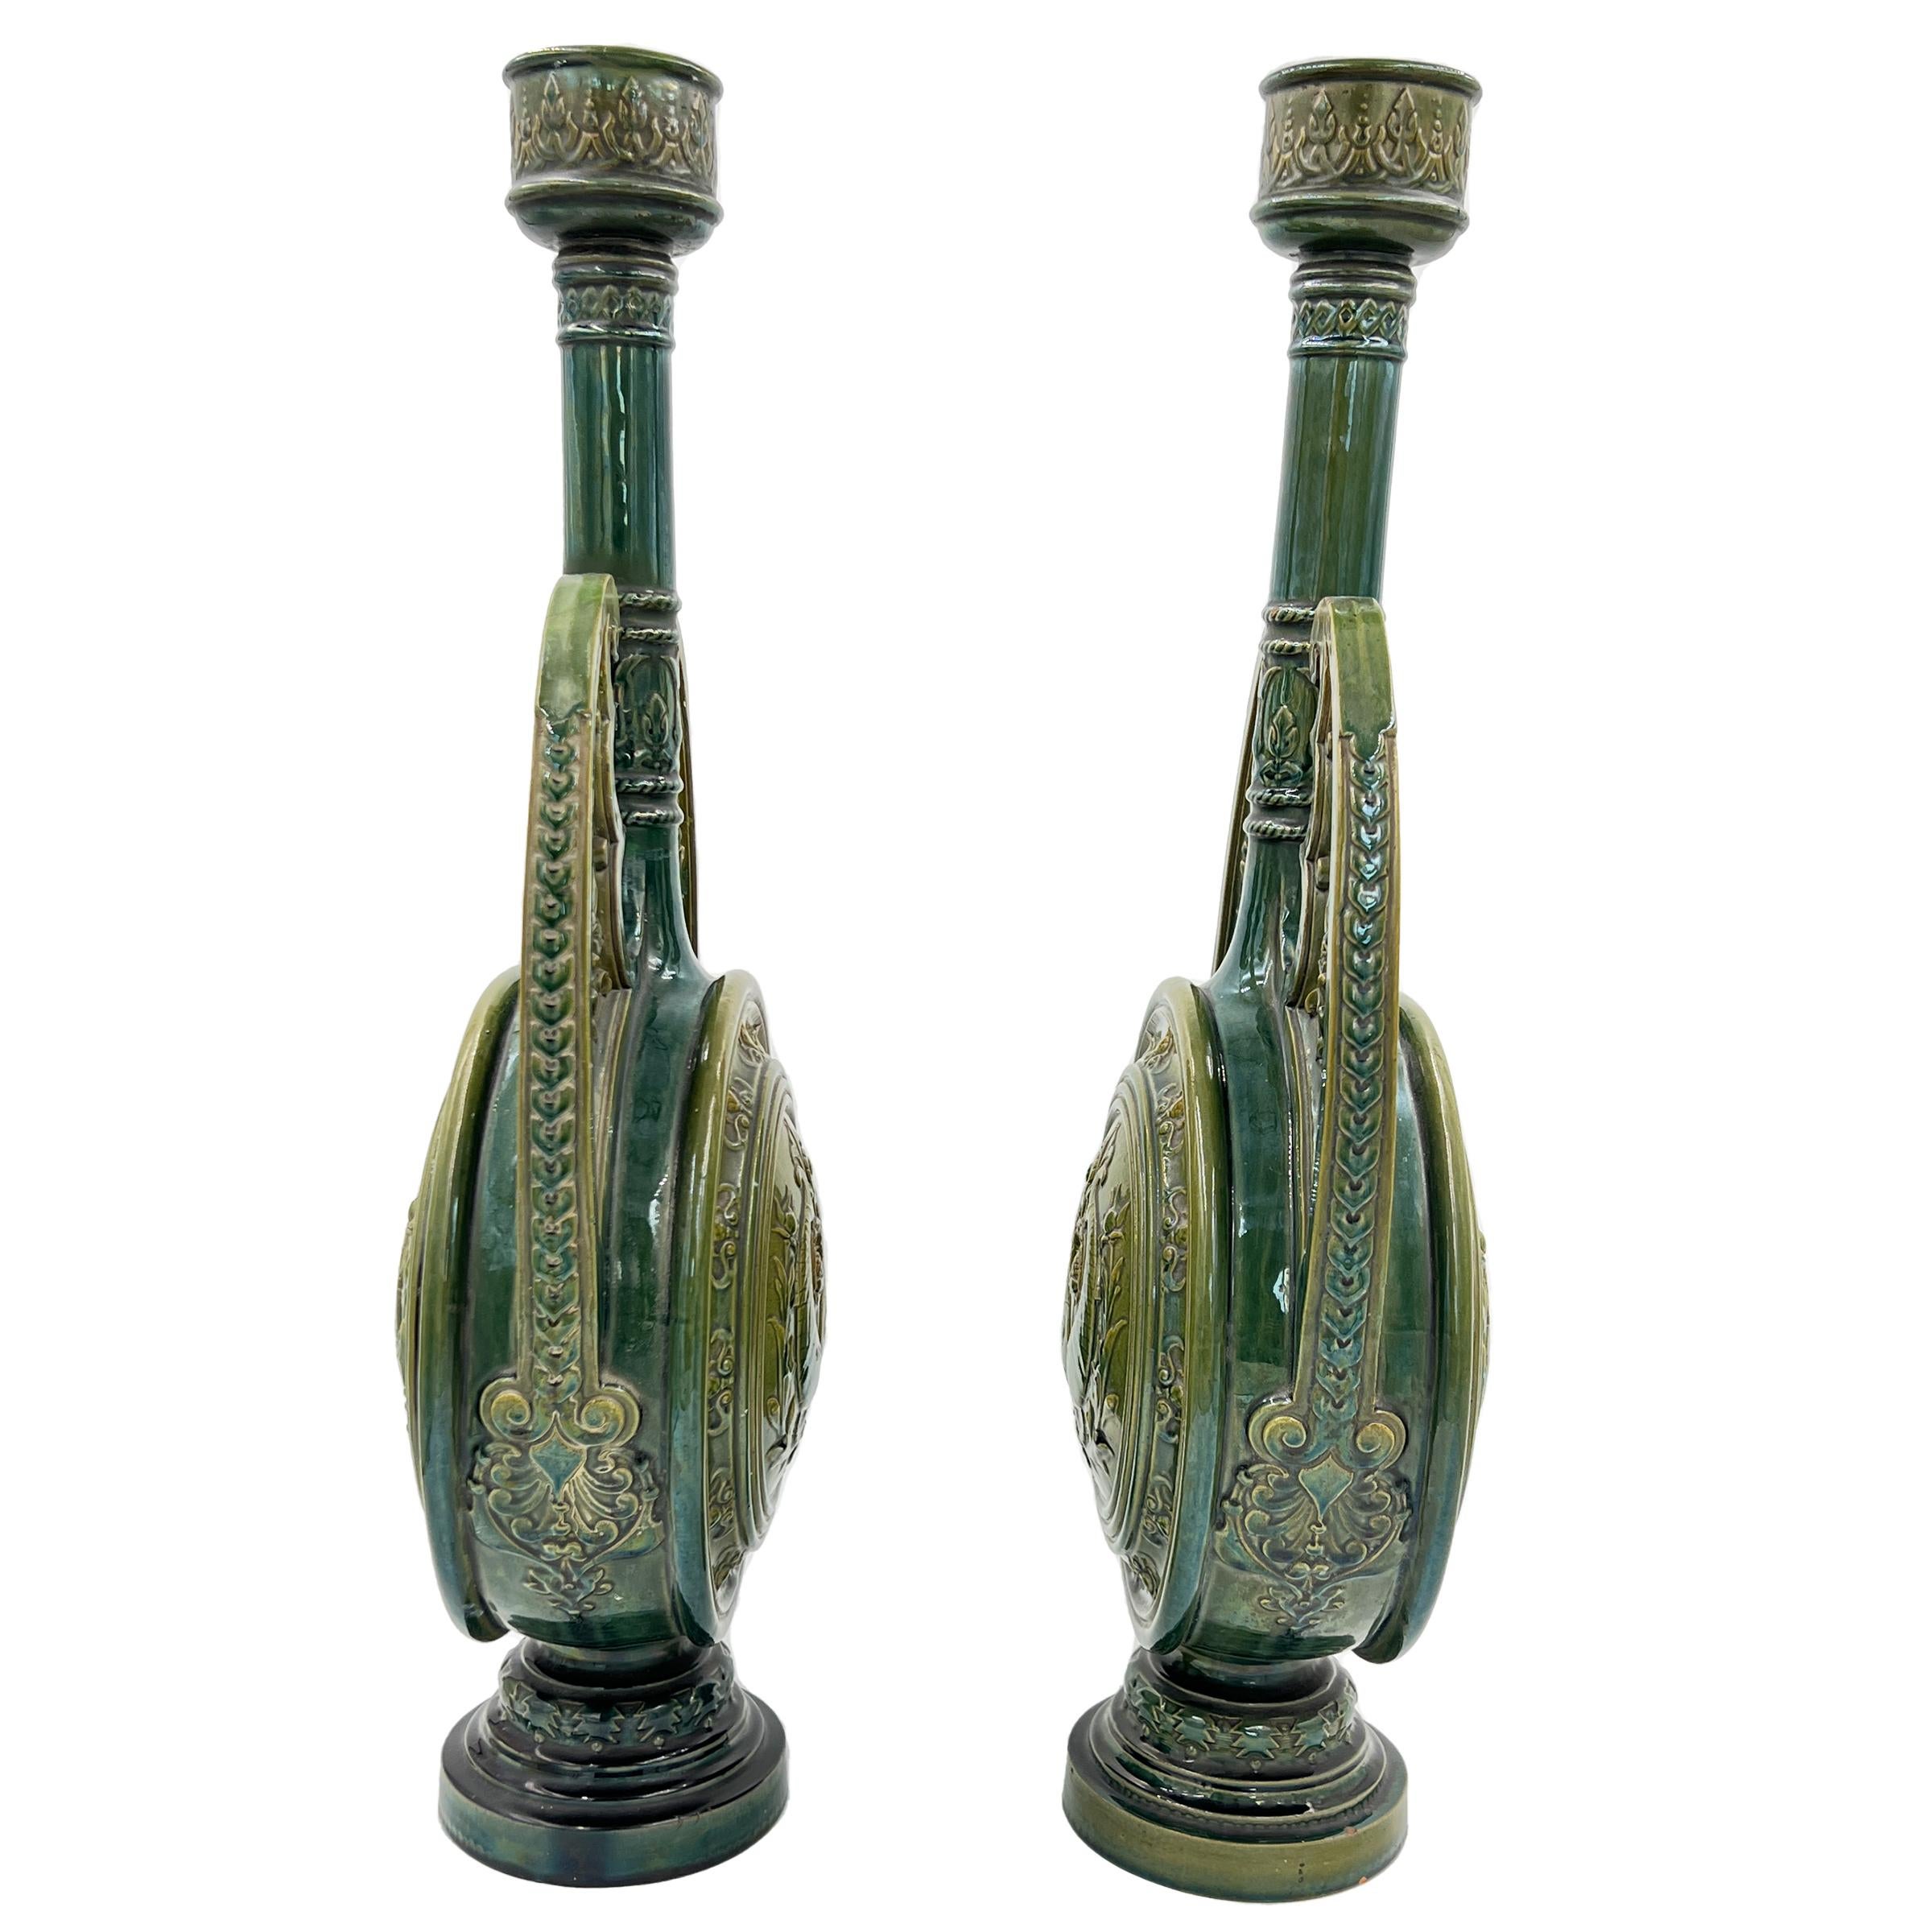 A fine 19th century pair of green glazed candlesticks with fish motifs on the circular body.